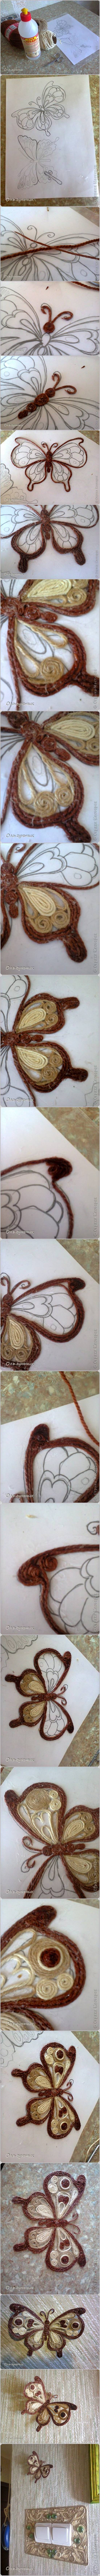 How to Make Beautiful Filigree Butterfly with Yarn